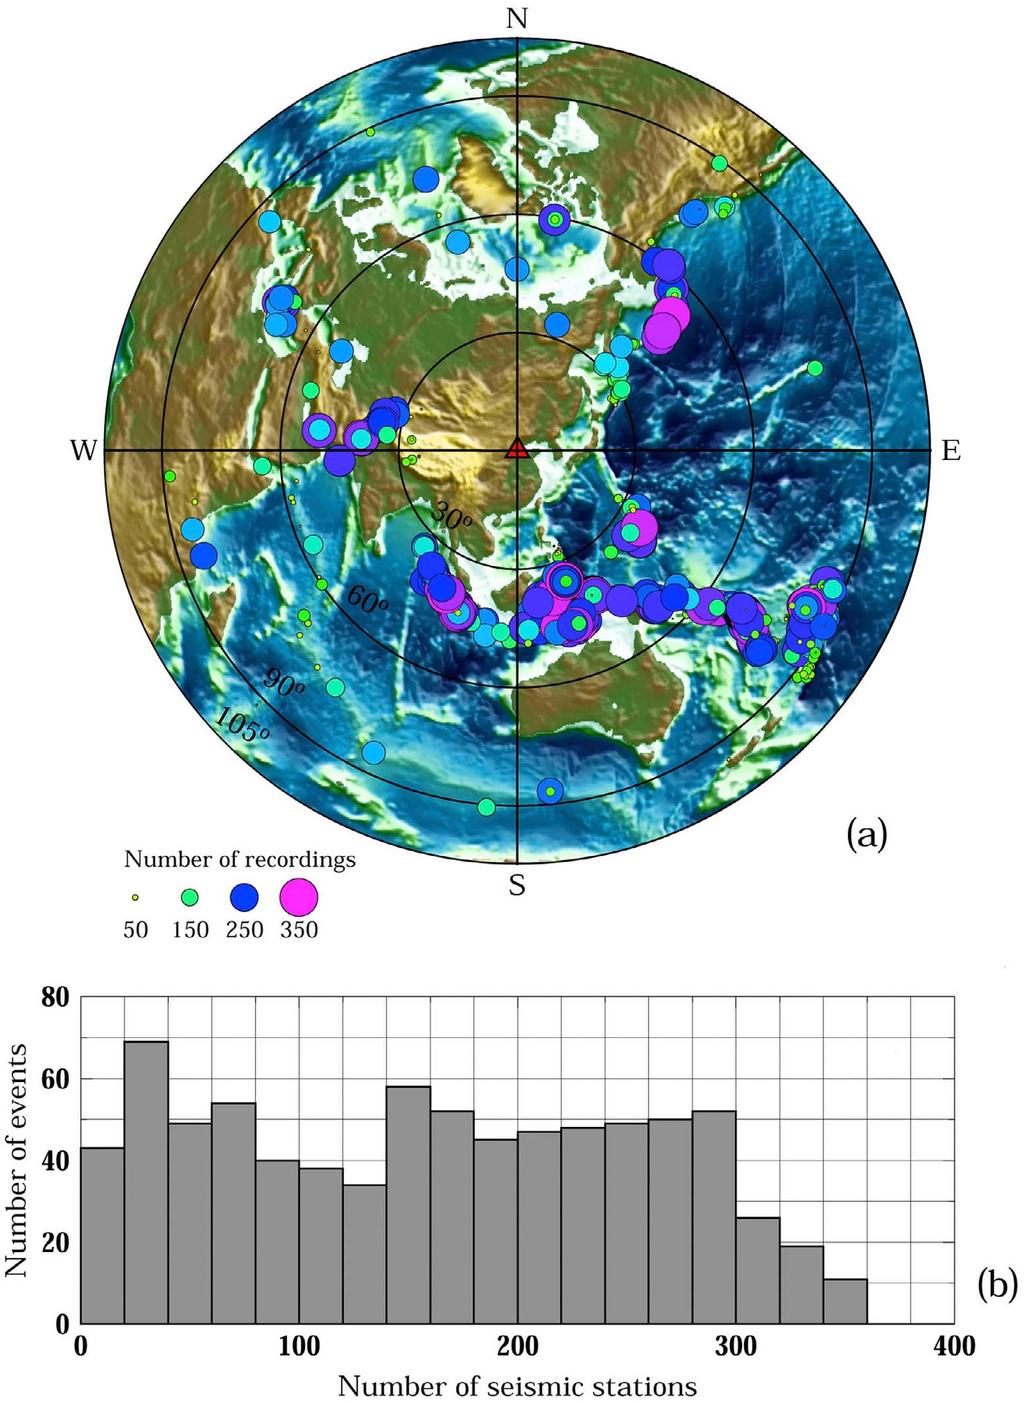 Figure 6. (a) Spatial distribution of the numbers of seismic stations that recorded the corresponding teleseismic event.